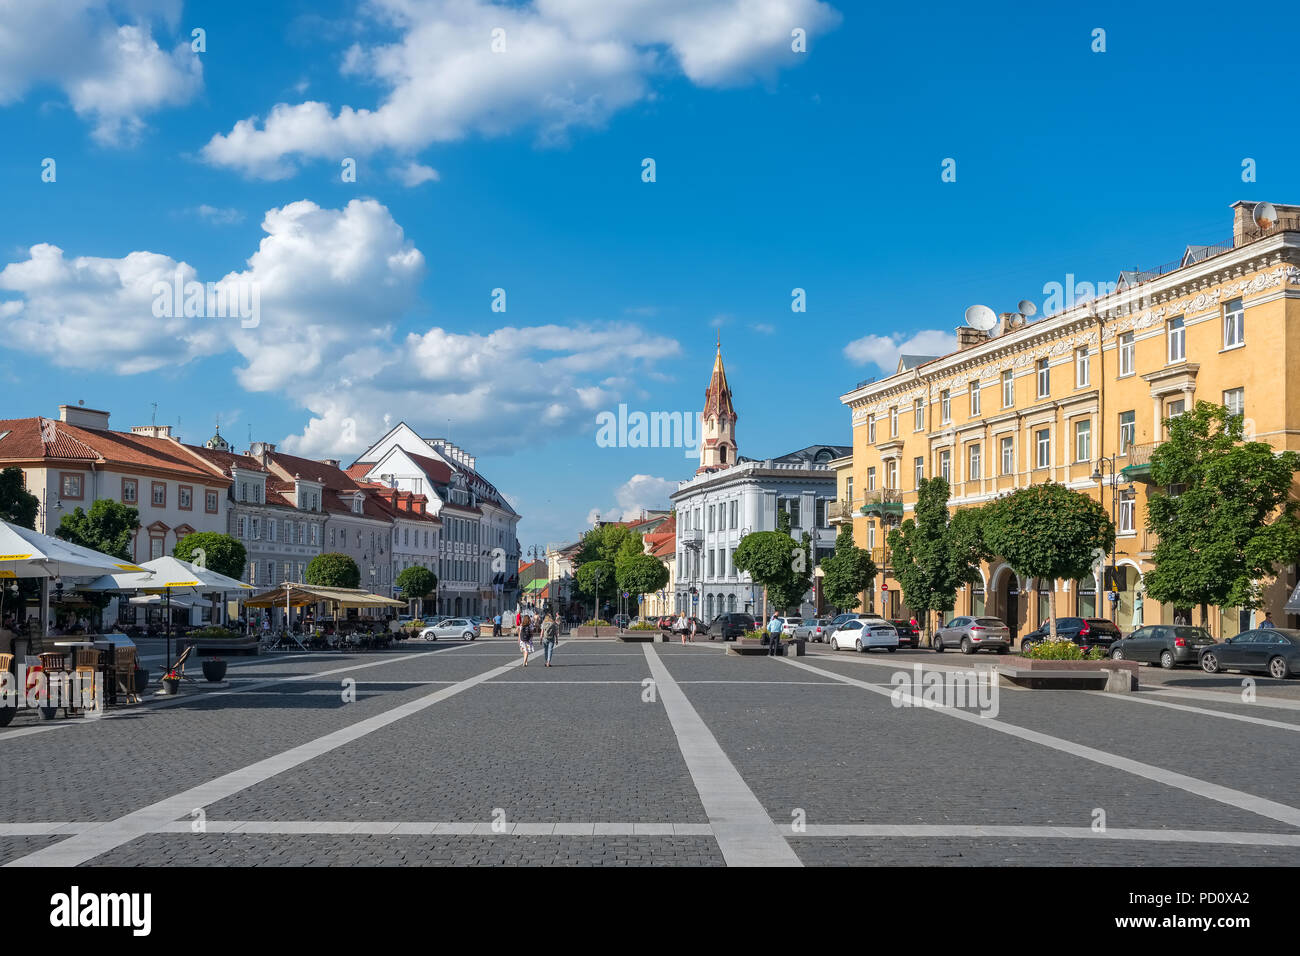 Vilnius, Lithuania - May 28, 2018: The Town Hall Square (Rotuses aikste) in Vilnius, Lithuania Stock Photo